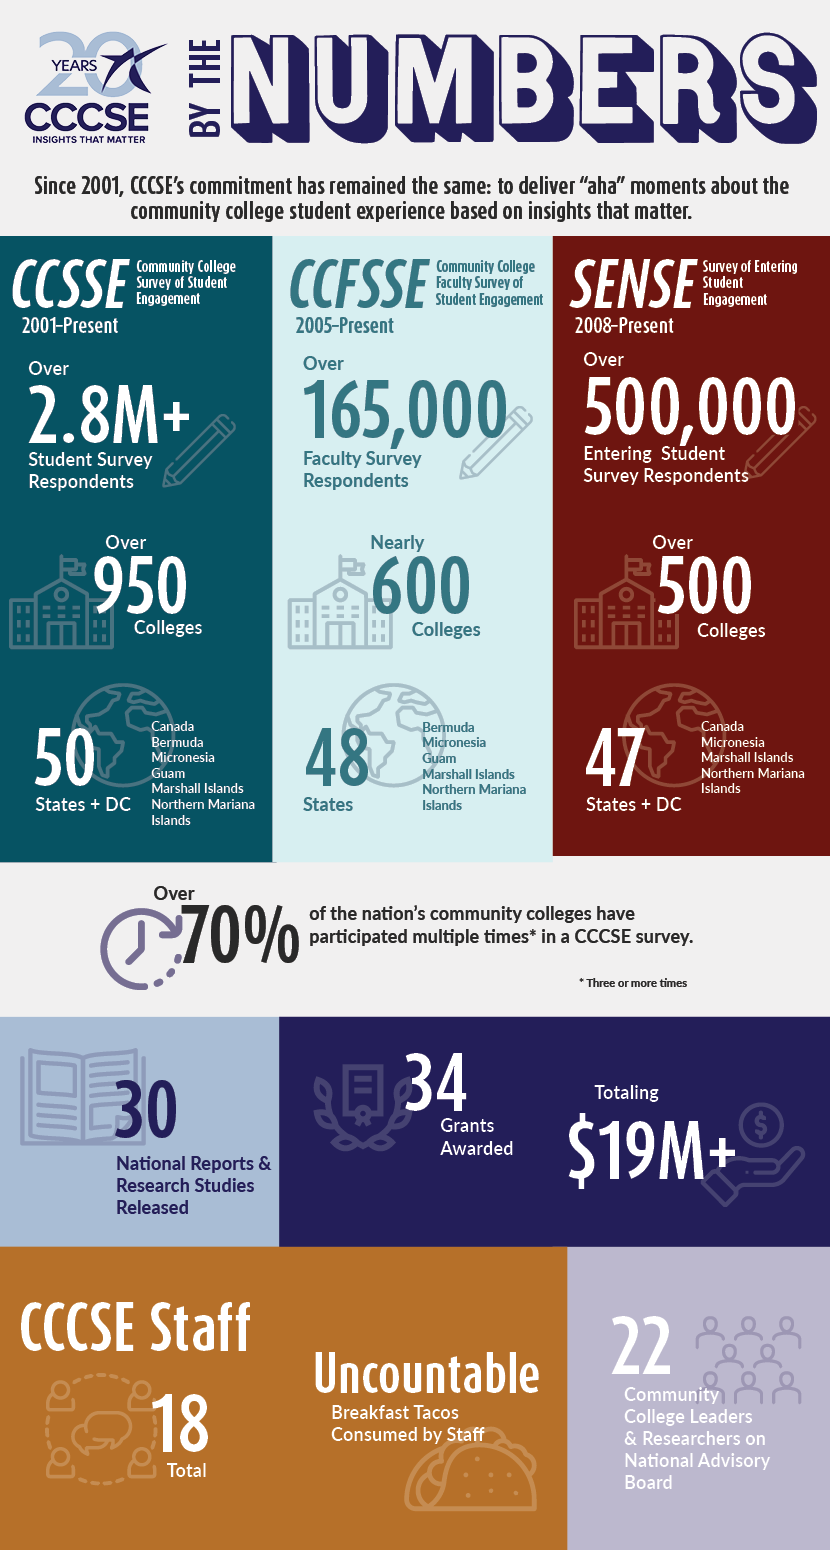 20 Years of CCCSE - By the Numbers